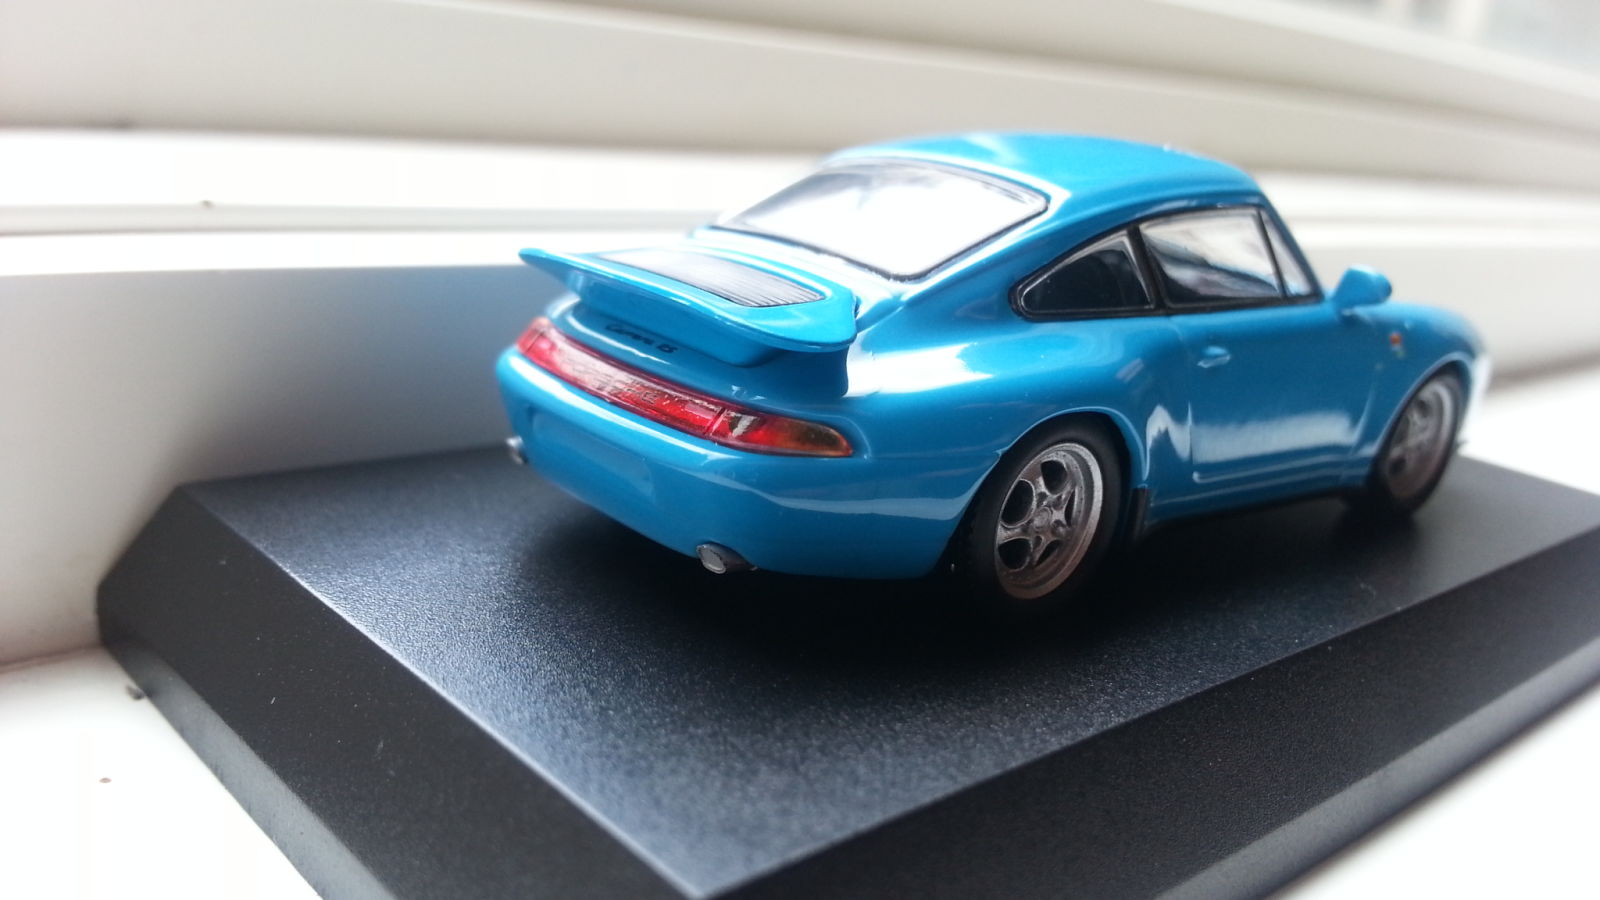 Illustration for article titled Kyosho Porsche 993 (1:64) [Teutonic Tuesday]